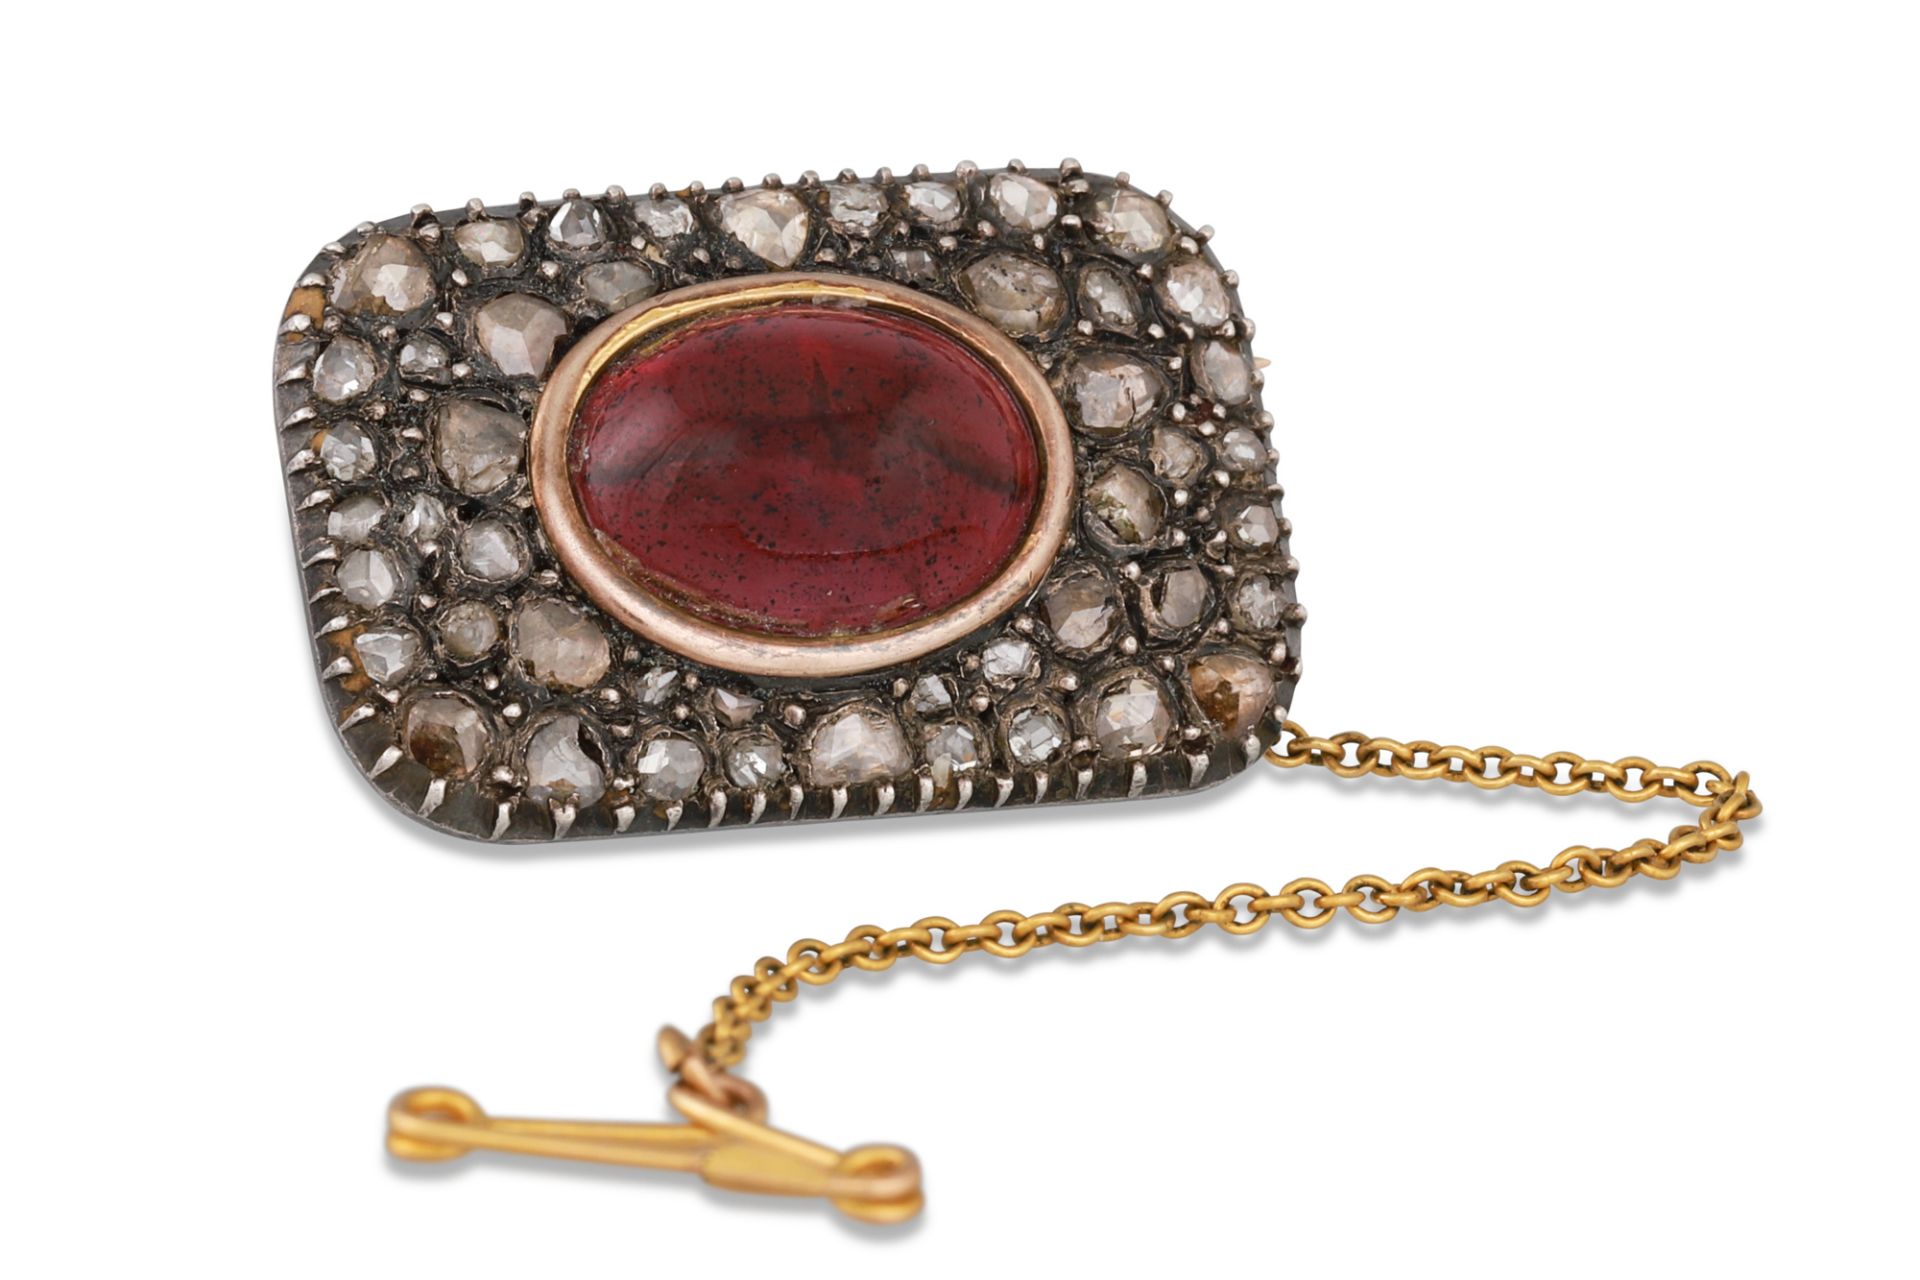 AN ANTIQUE CABOCHON GARNET AND ROSE CUT DIAMOND BROOCH, safety chain • Approx. 1.1" x 0.80"